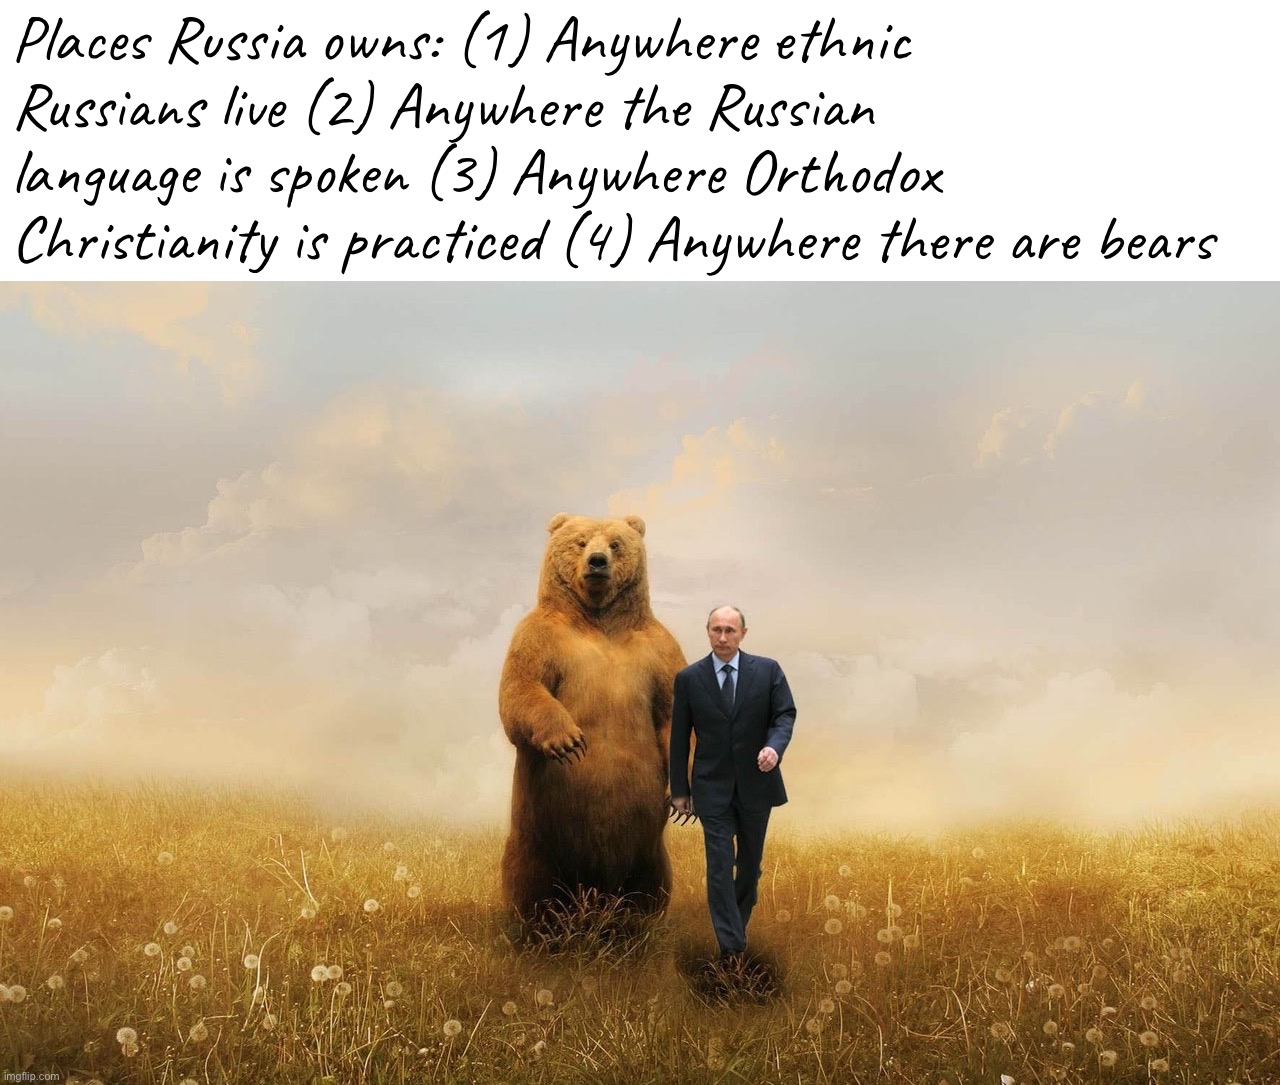 The Russian world: defined | Places Russia owns: (1) Anywhere ethnic Russians live (2) Anywhere the Russian language is spoken (3) Anywhere Orthodox Christianity is practiced (4) Anywhere there are bears | image tagged in birthday bear putin,russophilia,russia,russians,putin,bears | made w/ Imgflip meme maker